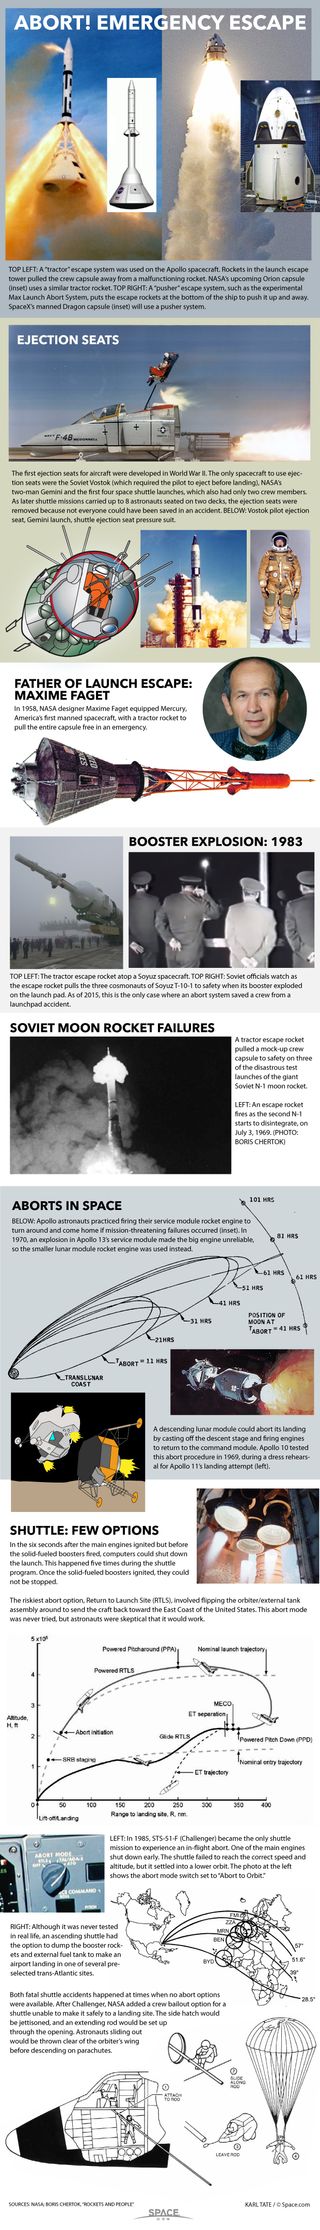 For more than 50 years, spacecraft have relied on rockets and tricky maneuvers to get out of danger when missions don't go as planned. See how launch abort systems work in this Space.com infographic.